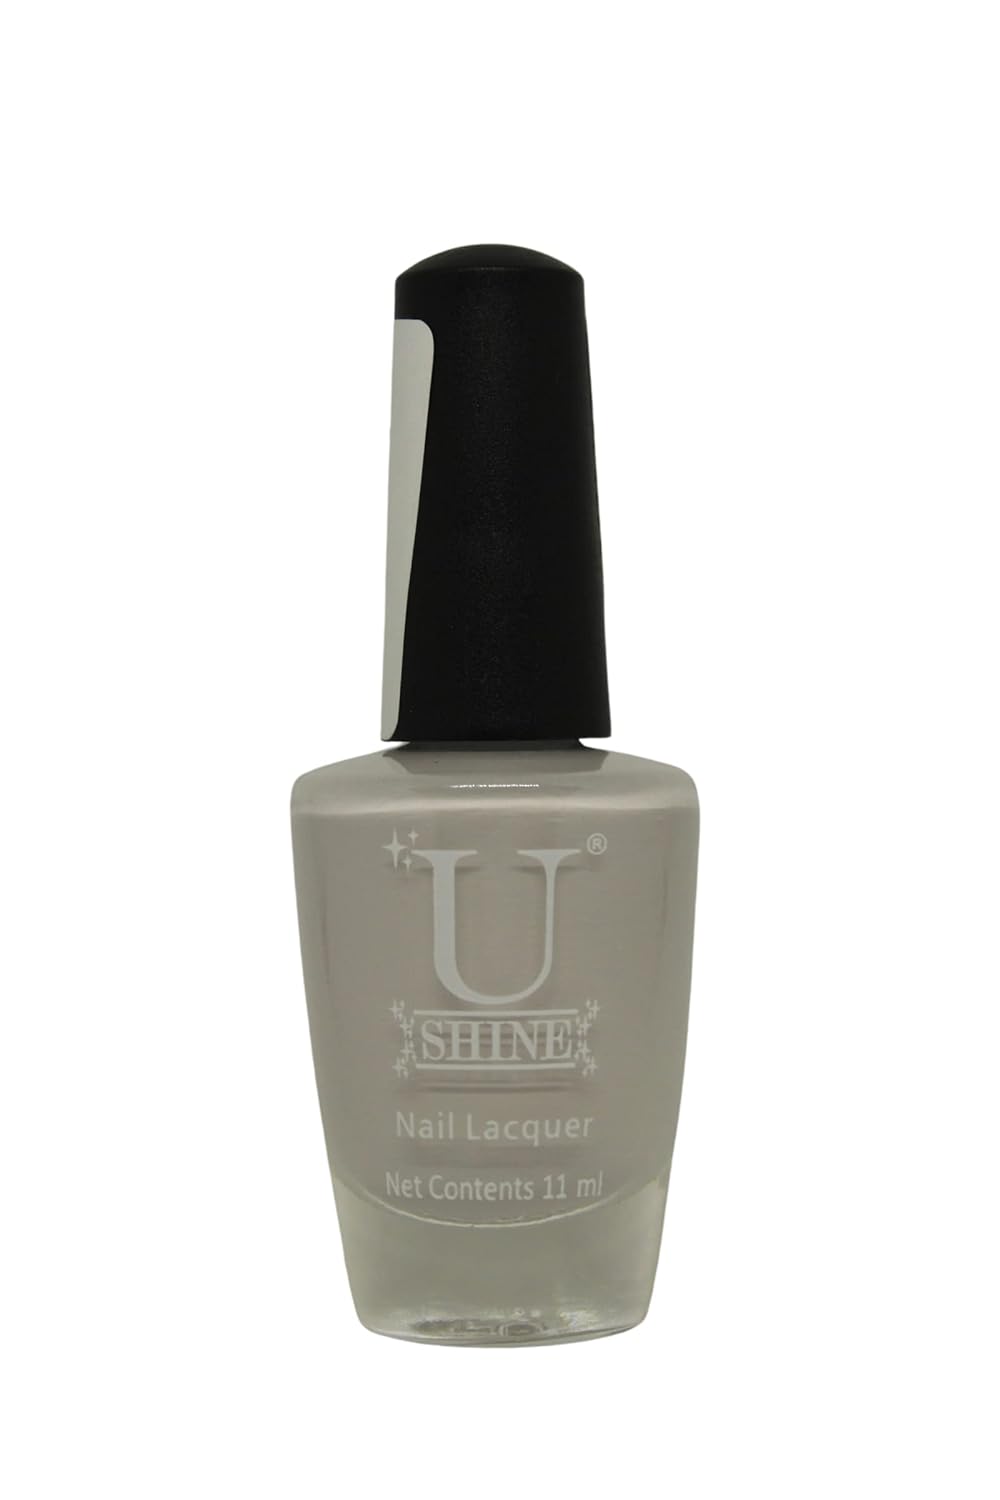 U Shine Me & Mary|Pale Violet|Glossy|11ml |No Paraben, Nail Yellowing, Chipping or Cracking & Long Wear | Vegan & FREE from Harmful Chemicals